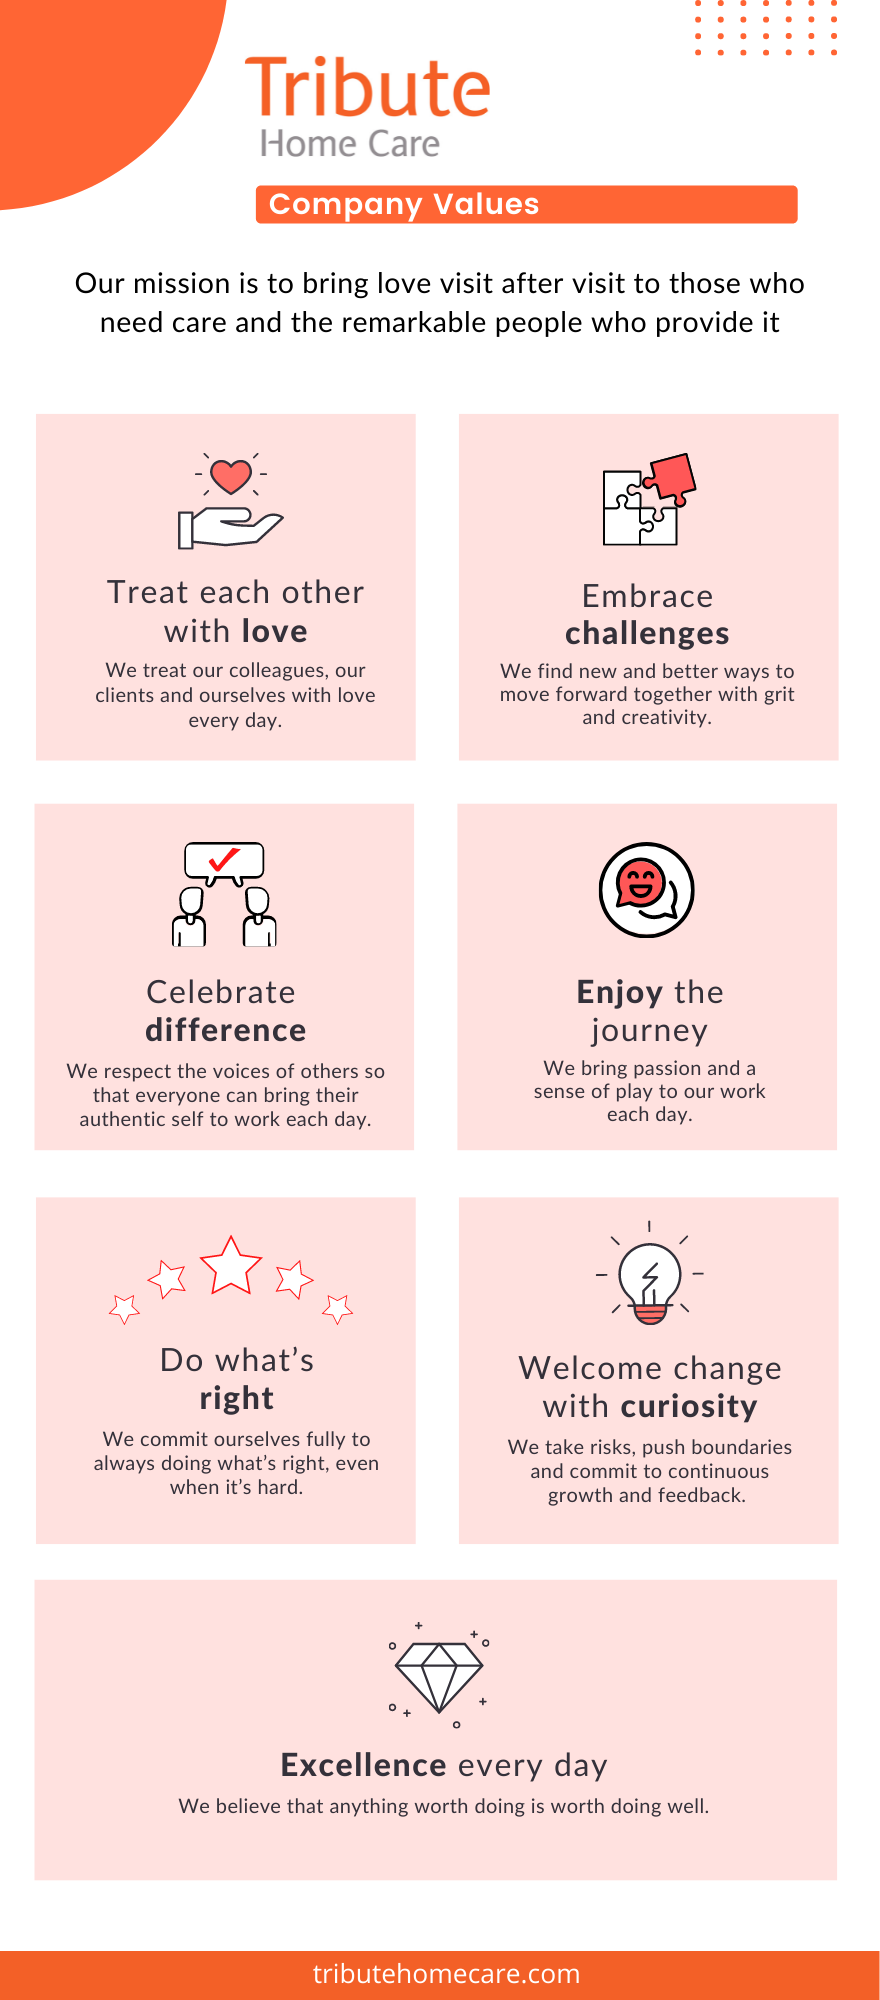 Tribute Home Care Company Values infographic. Our mission is to bring love visit after visit to those who need care and the remarkable people who provide it. Treat each other with love. Embrace challenges. Celebrate difference. Enjoy the Journey. Do what's right. Welcome change with curiosity. Excellence every day.